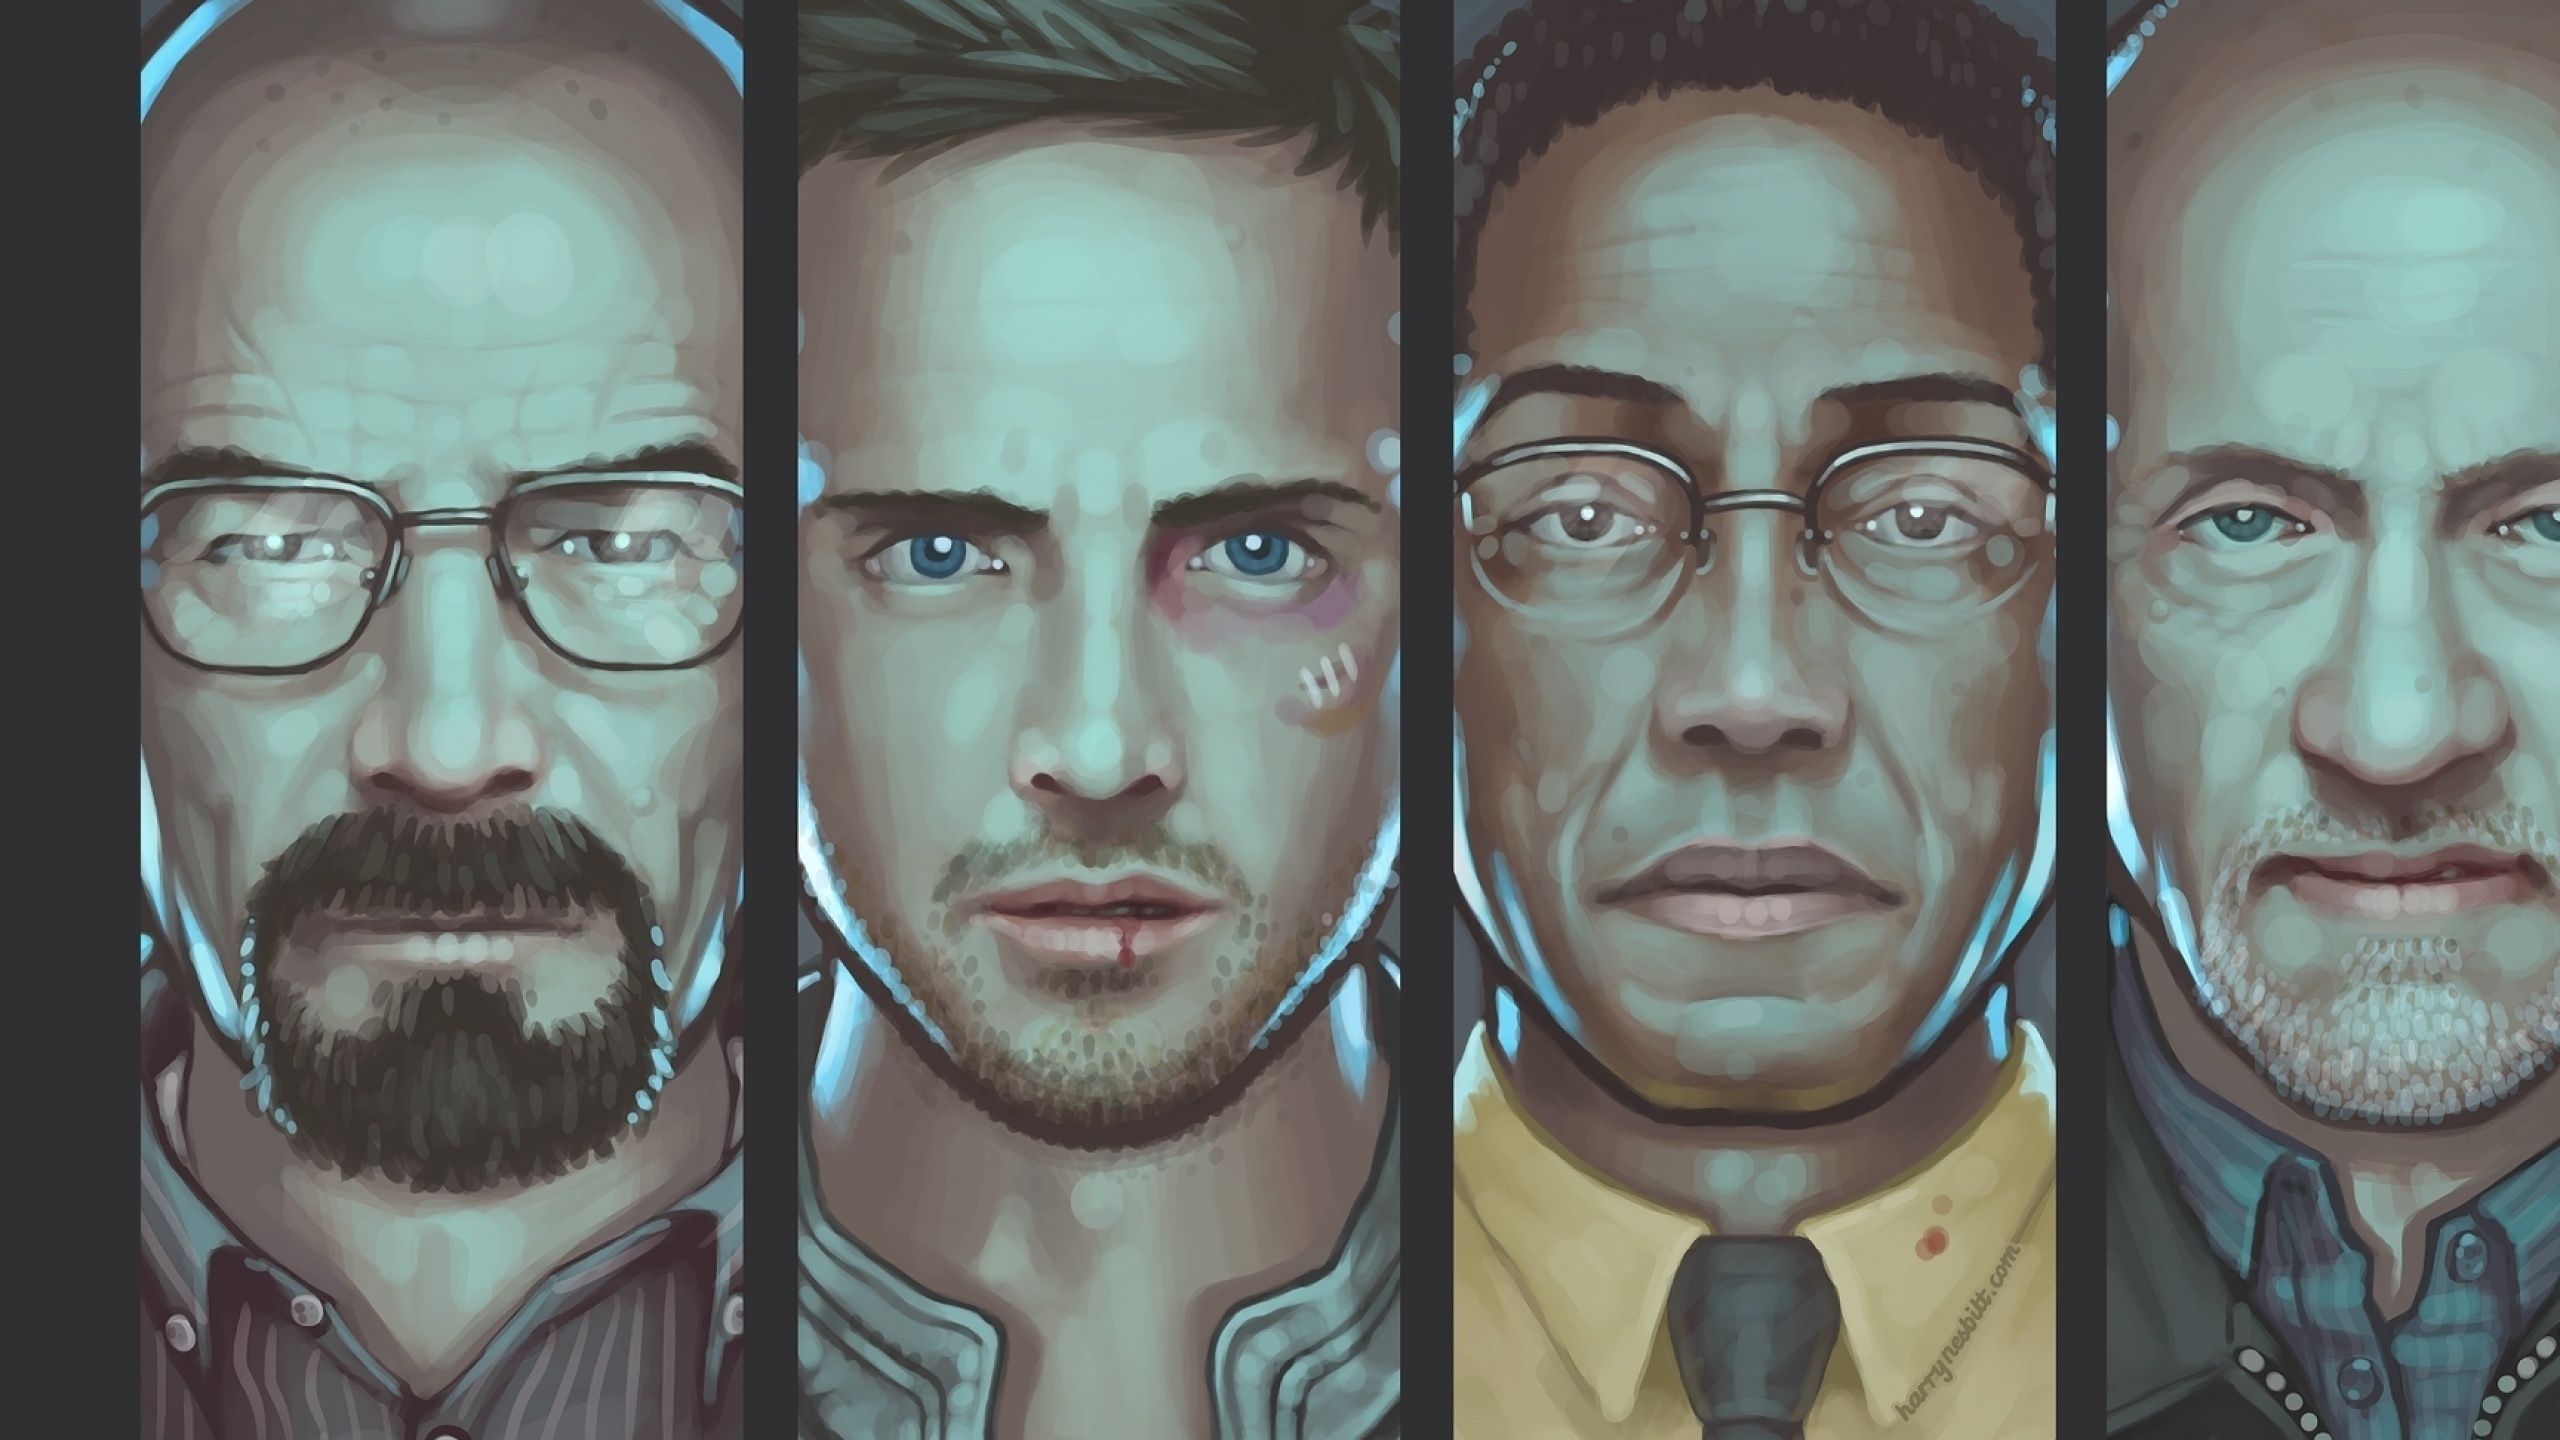 Breaking Bad Characters Artwork for 2560x1440 HDTV resolution